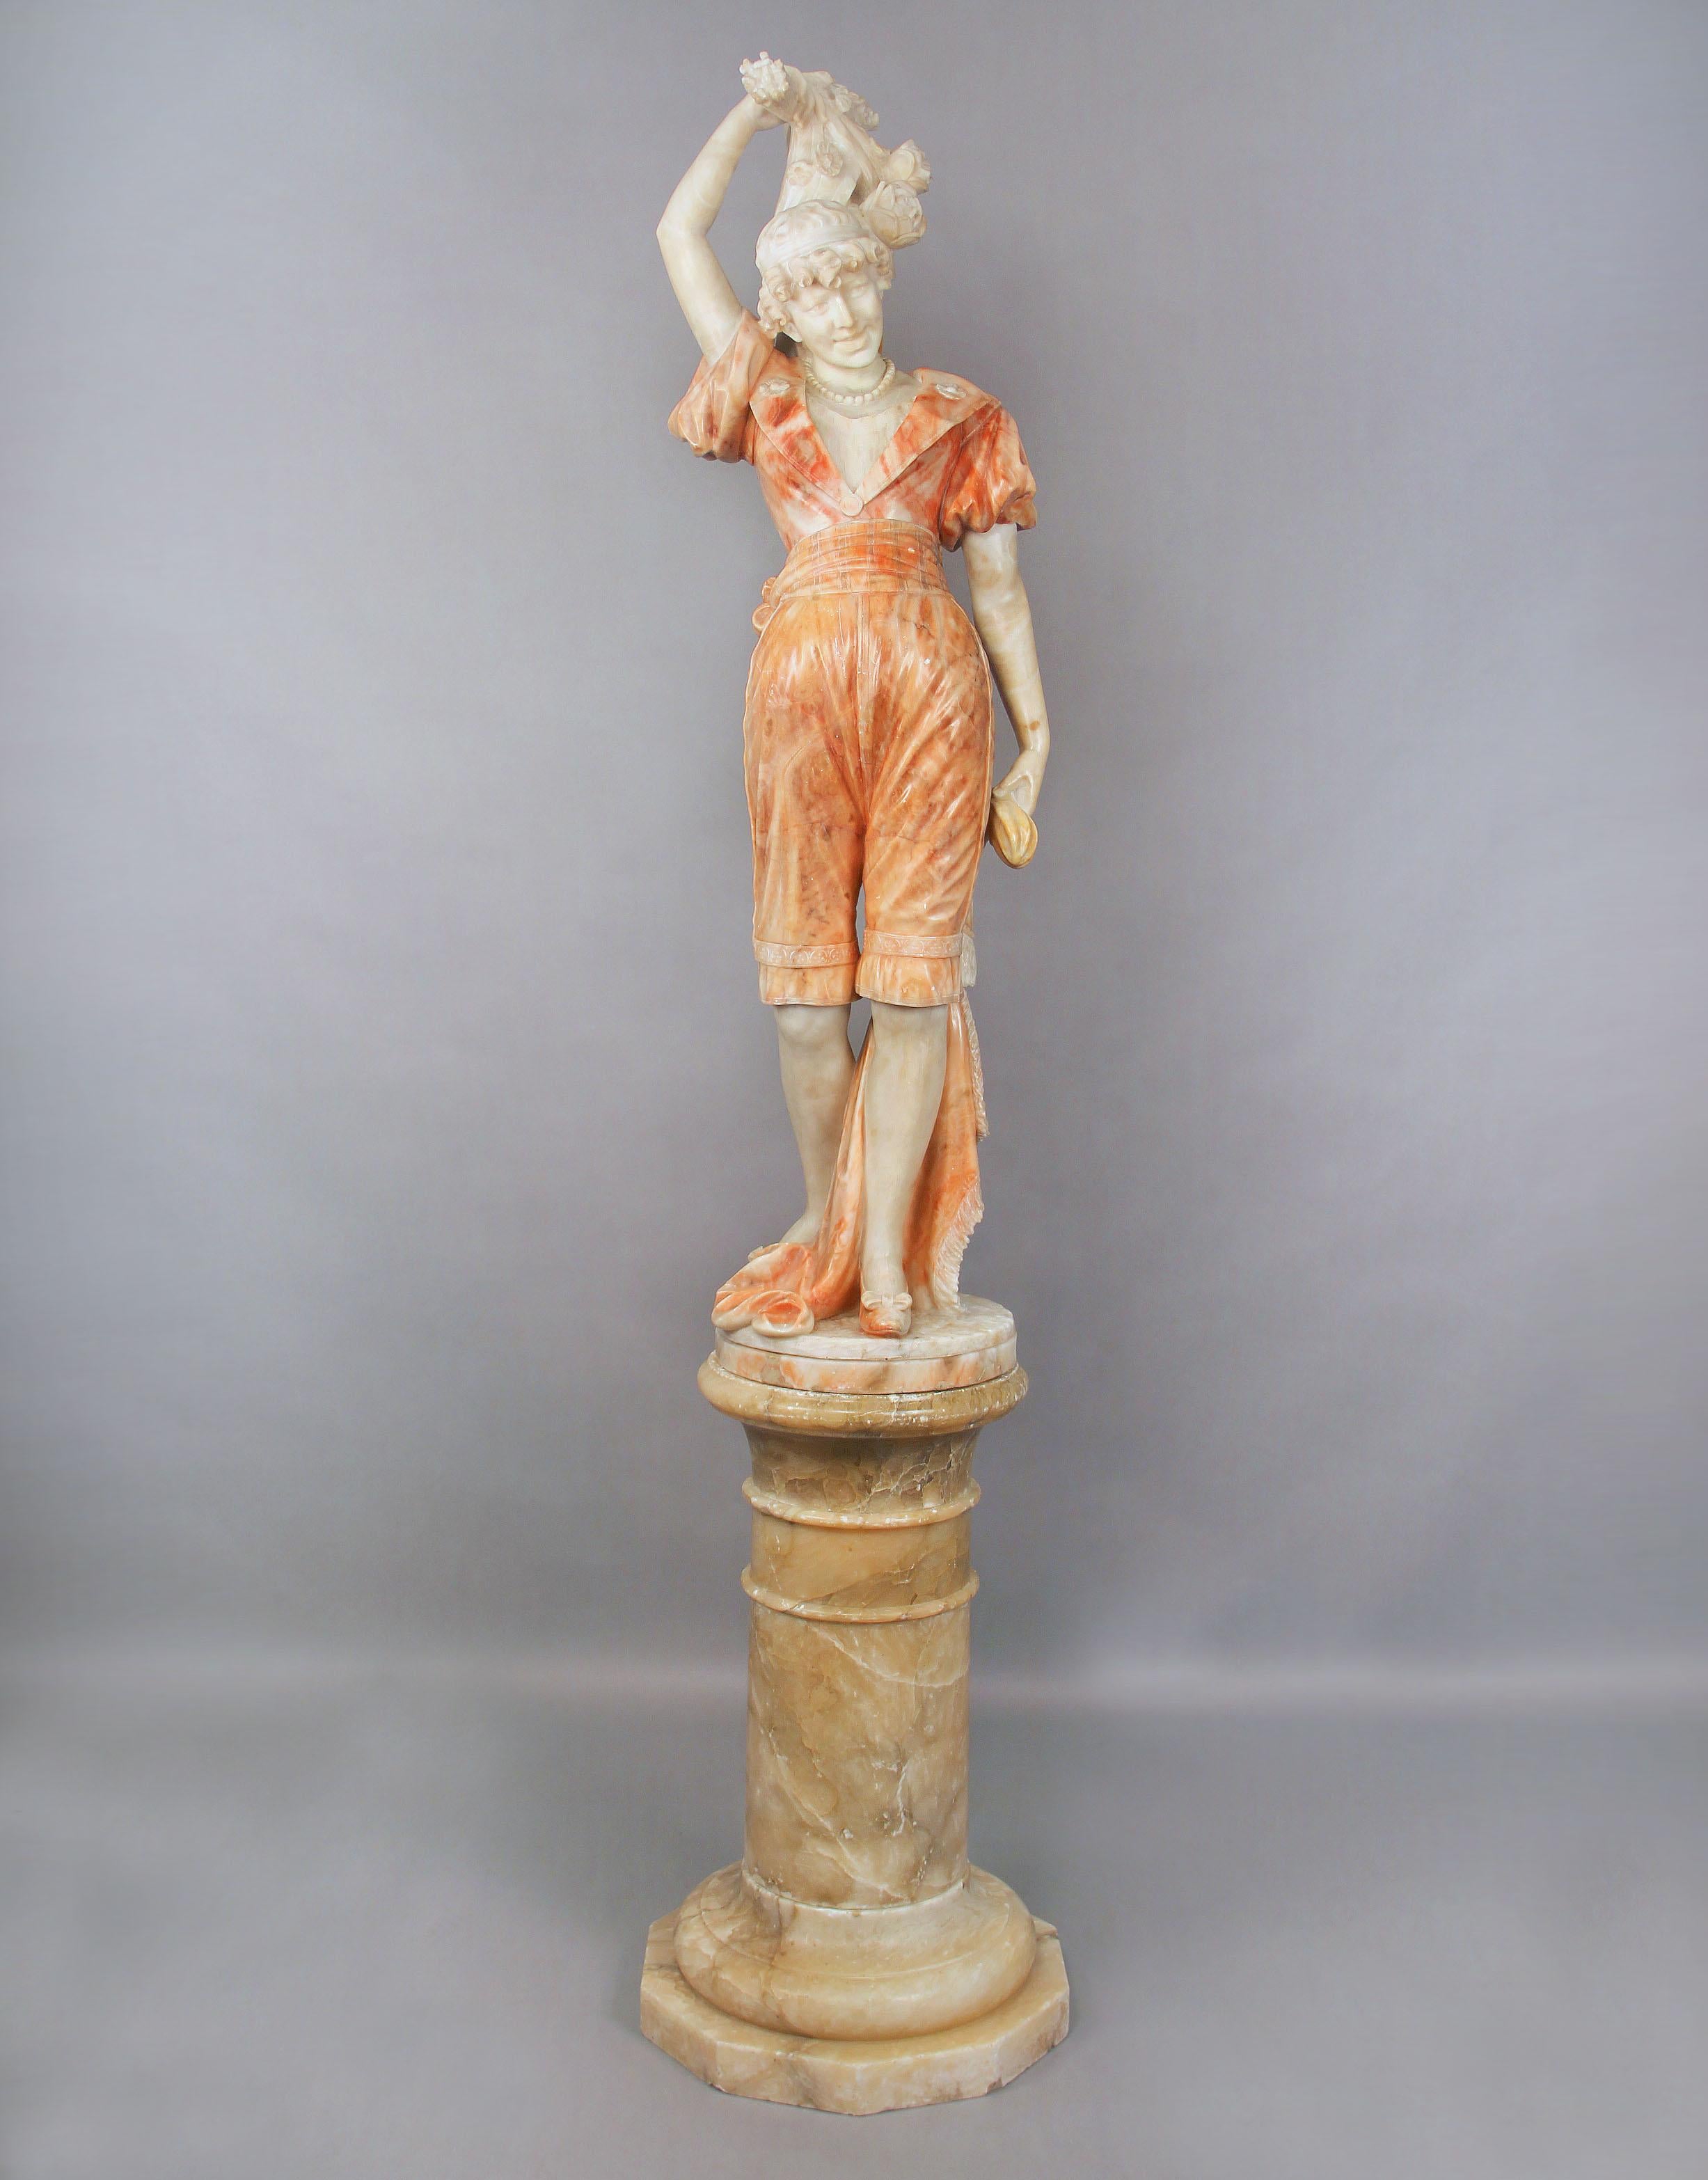 A Lovely Late 19th / Early 20th Century Carved Italian Alabaster Figure of a Woman with Flowers


The woman wearing a white veined mottled orange alabaster pants and jacket, her hand holding up a bundle of flowers.  Standing upon an alabaster